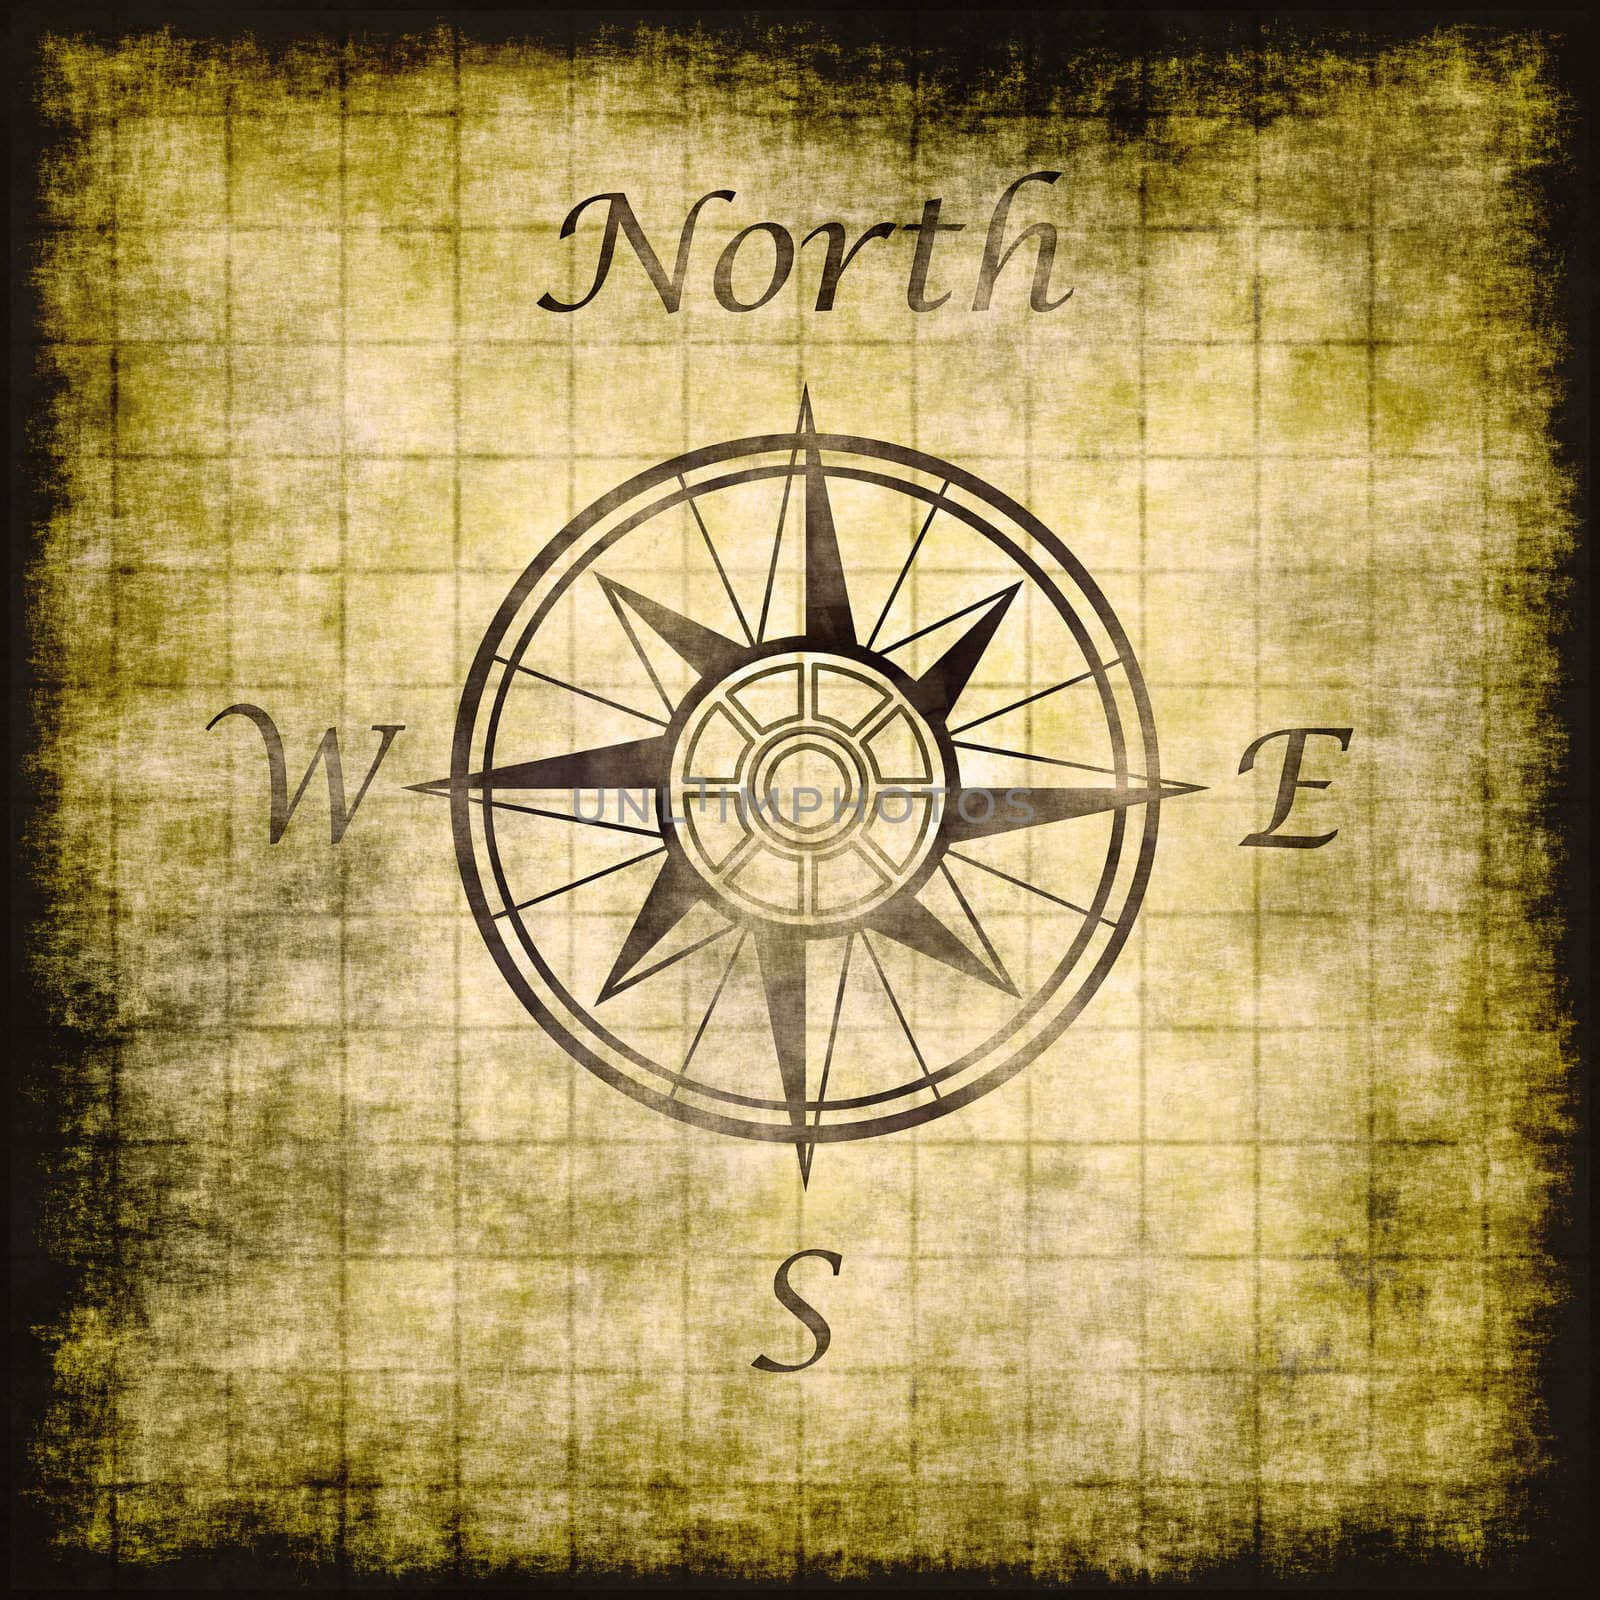 north and directional compass markings on grunge parchment